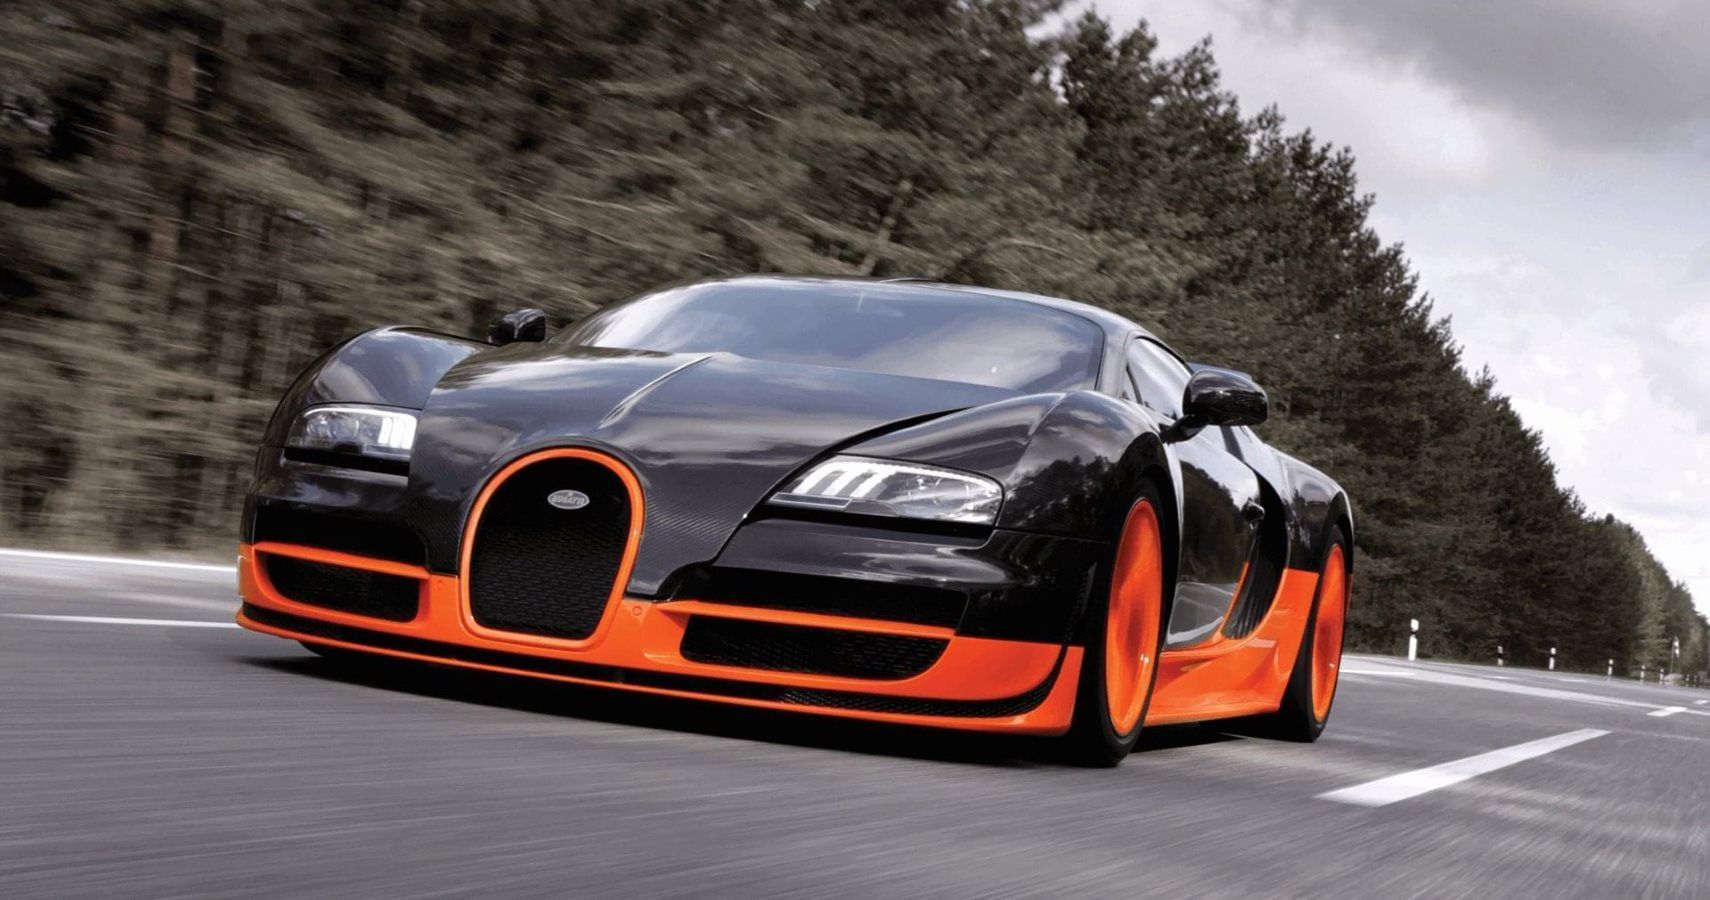 Bugatti Veyron Oil Changes Are Expensive & Difficult